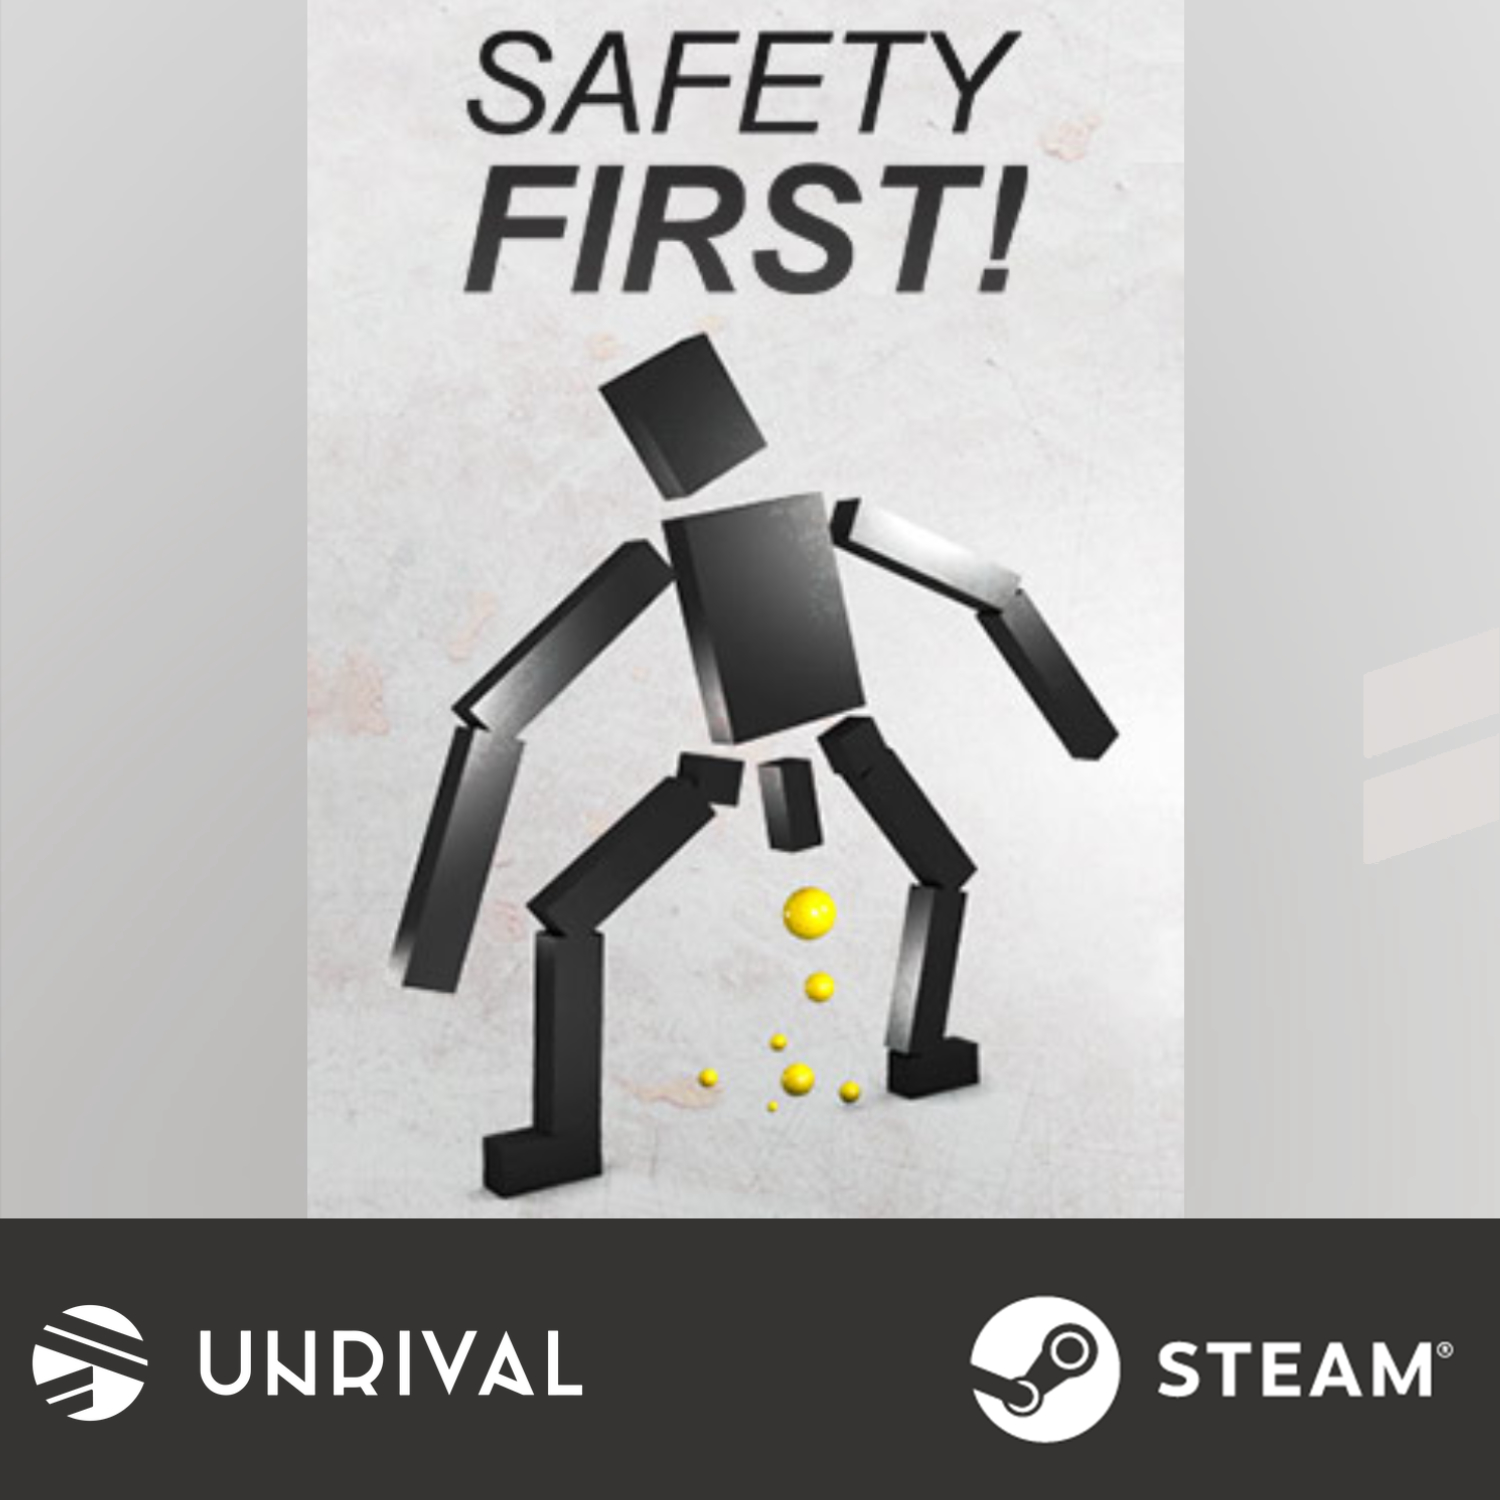 [Hot Sale] Safety First! PC Digital Download Game (Single Player) - Unrival